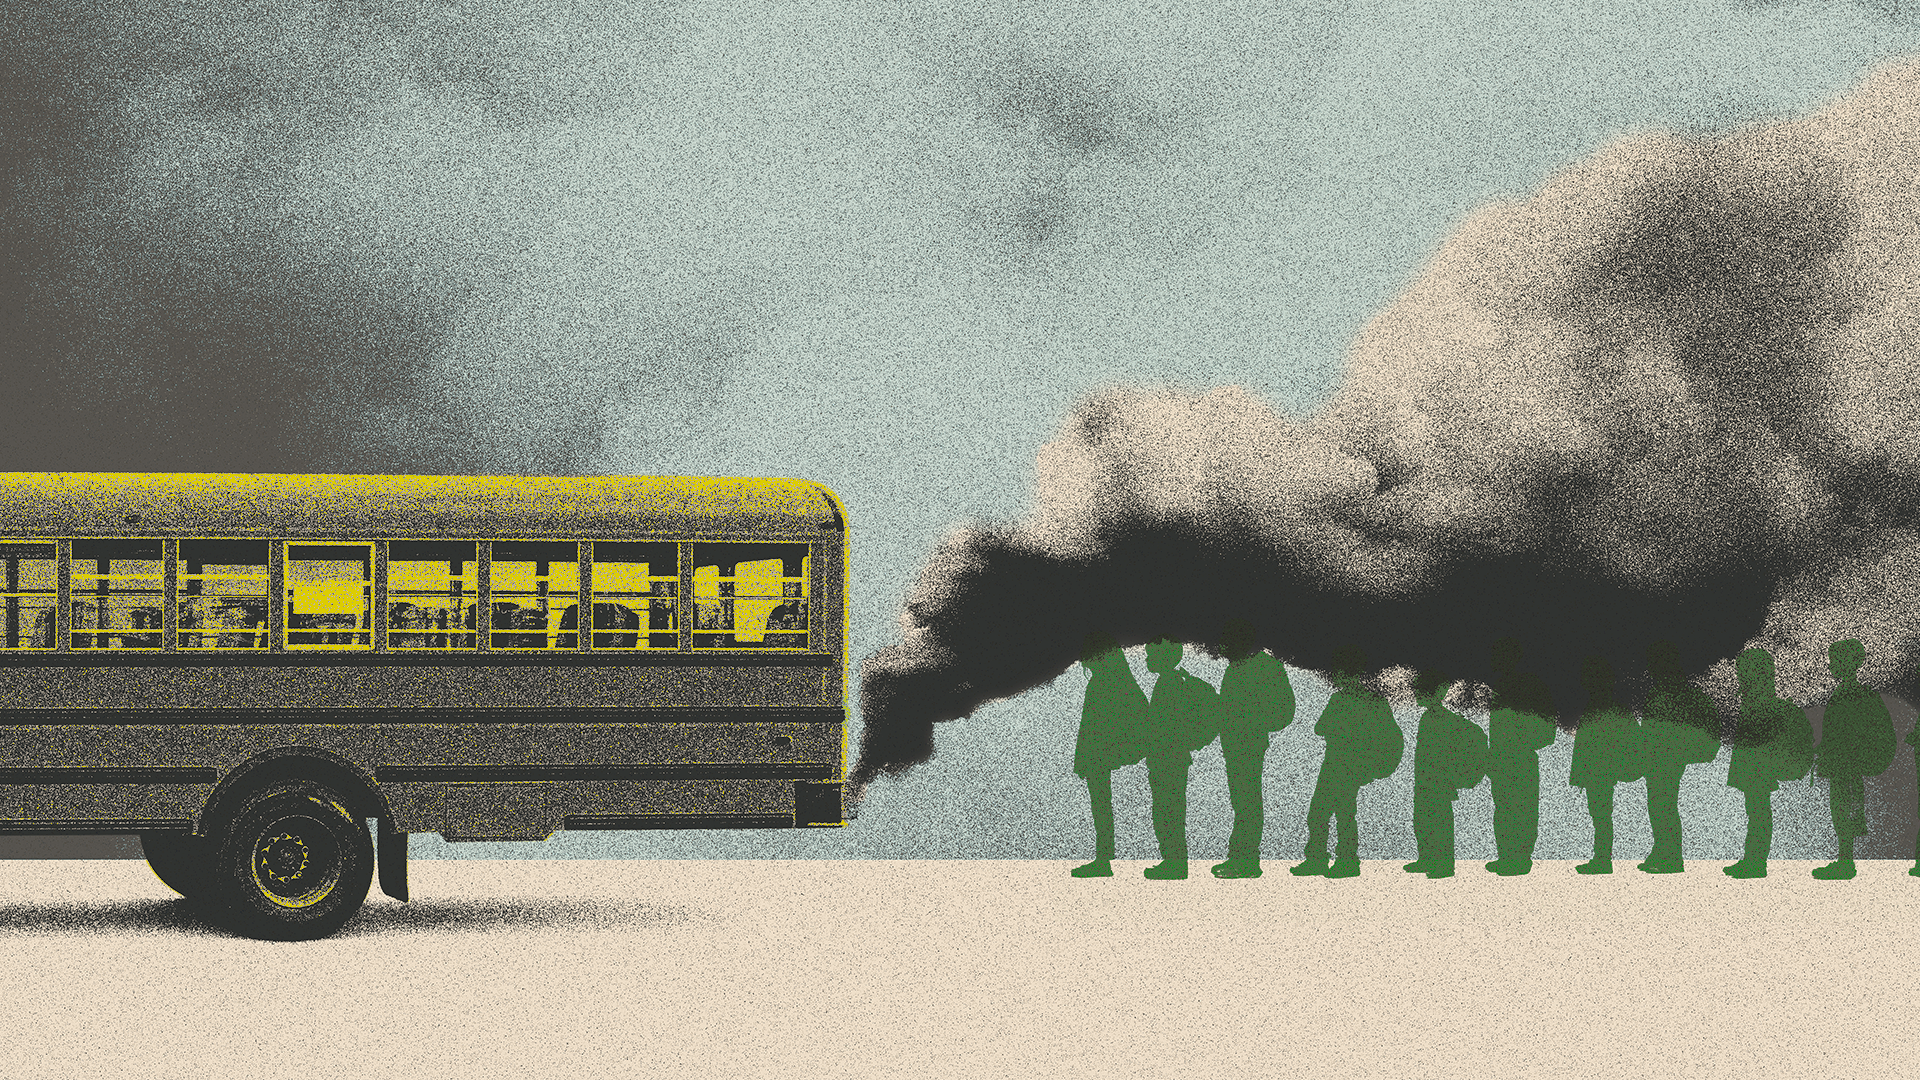 A giant pollution cloud is being emitted from a diesel-run school bus. The cloud surrounds a line of children just behind it.